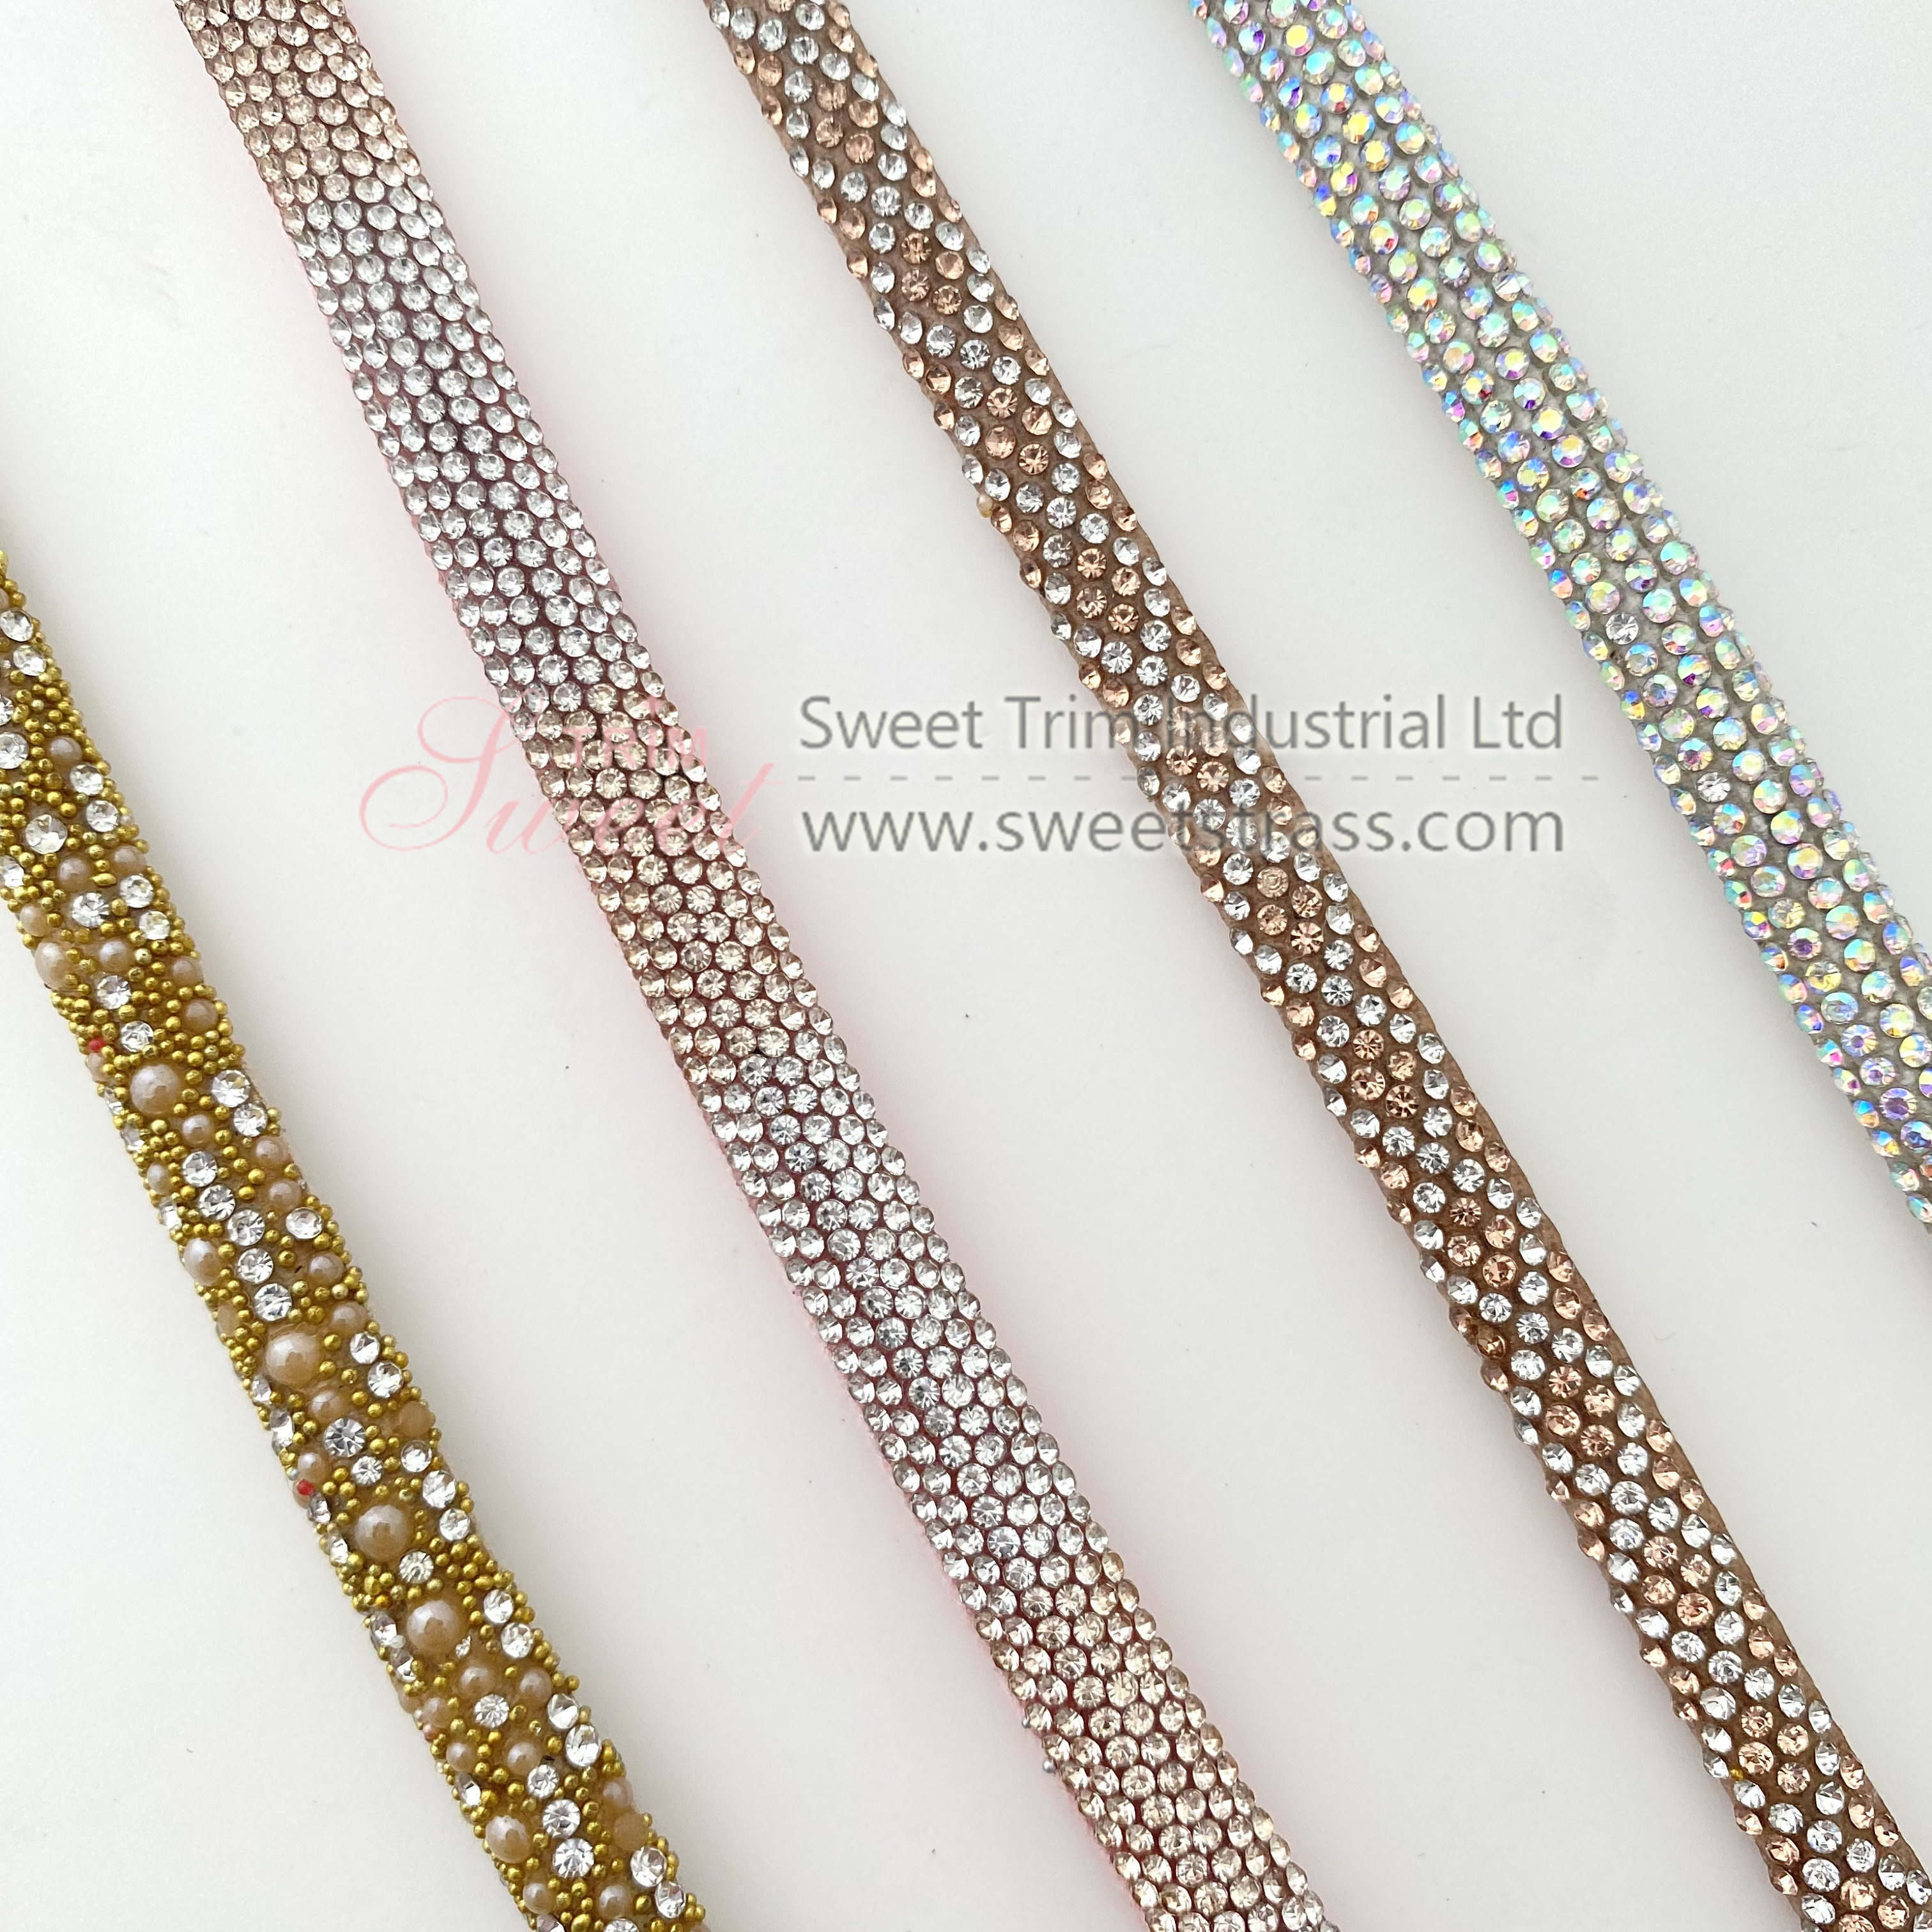 <b>Wholesale 4 Rows Of 5 Rows Of Semicircle Half Face Rhinestone Rope Crystal Strips For Popular Decorat</b>